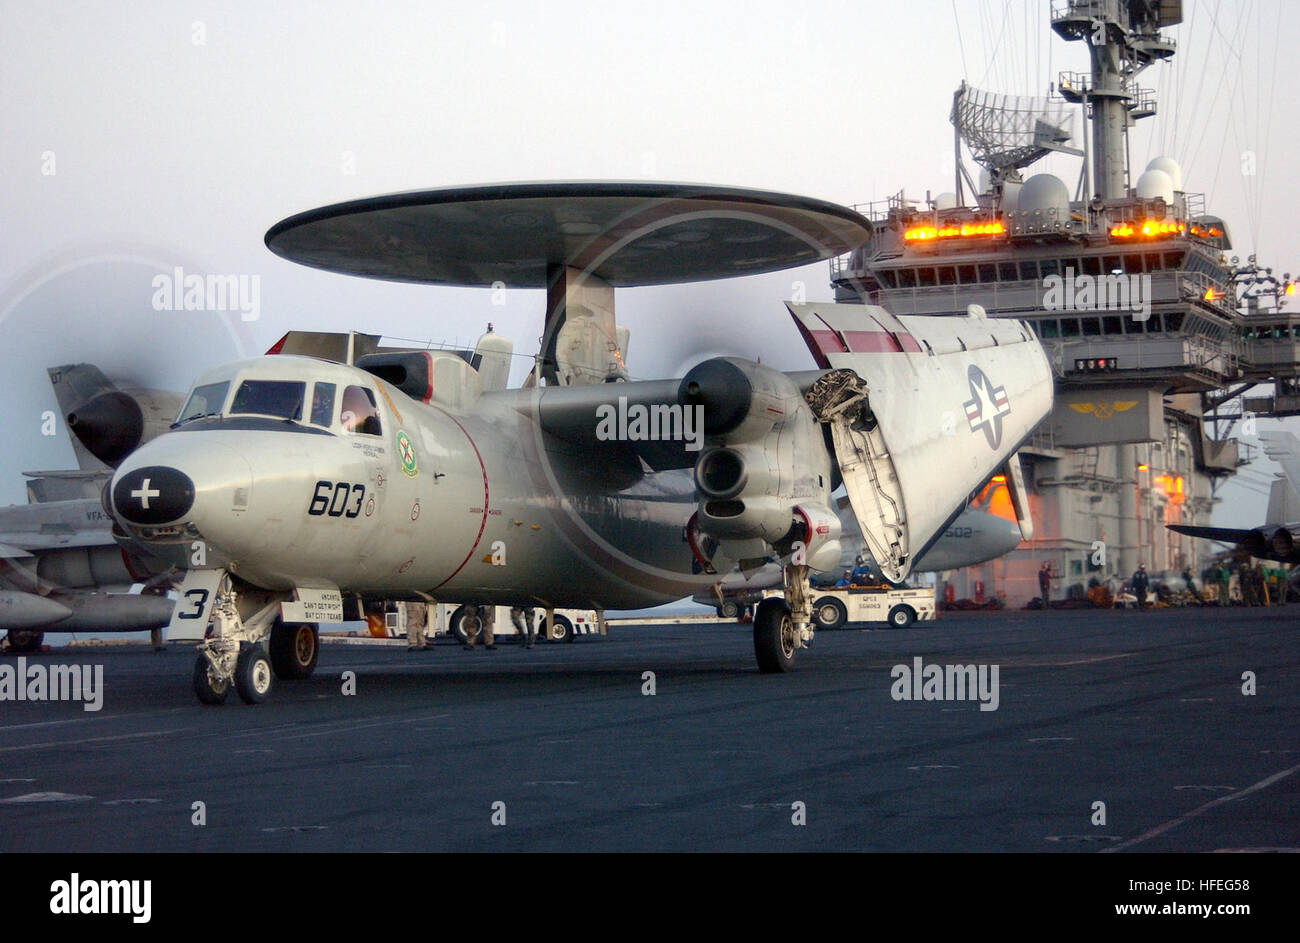 030228-N-1810F-010 Arabian Gulf (Feb. 28, 2003) -- An E-2C ÒHawkeyeÓ assigned to the ÒLiberty BellsÓ of Carrier Airborne Early Warning Squadron One One Five (VAW 115), maneuvers the flight deck aboard USS Kitty Hawk (CV 63) during preparations for launch.  Kitty Hawk and Carrier Air Wing Five (CVW-5) are operating with coalition forces in support of Operation Southern Watch and Enduring Freedom, and is the worldÕs only permanently forward-deployed aircraft carrier operating out of Yokosuka, Japan.  U.S. Navy photo by PhotographerÕs Mate 3rd Class Todd Frantom.  (RELEASED) US Navy 030228-N-1810 Stock Photo